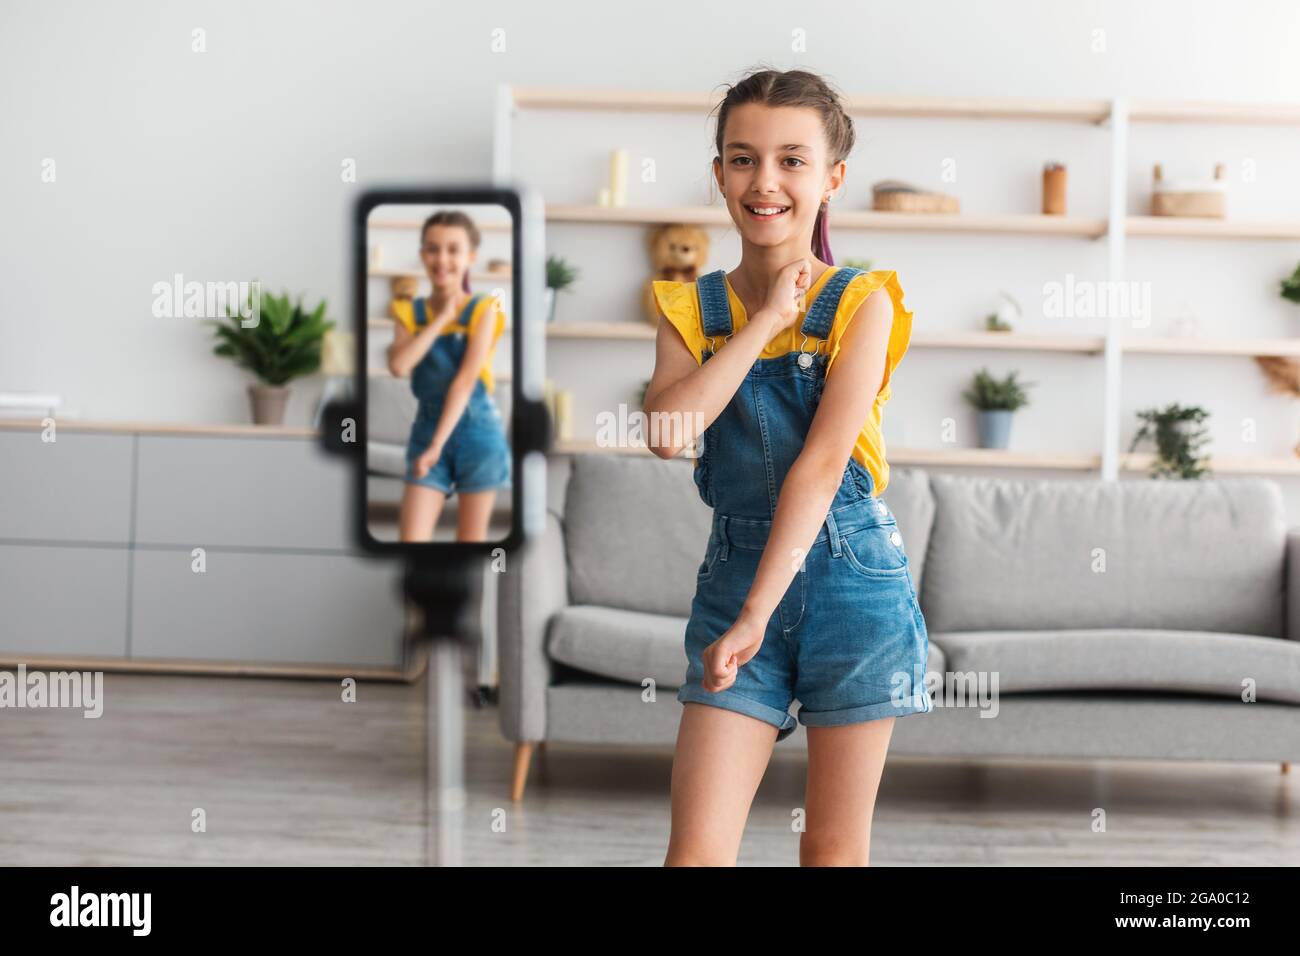 Cheerful teen girl dancing at camera filming video om cellphone Stock Photo  - Alamy